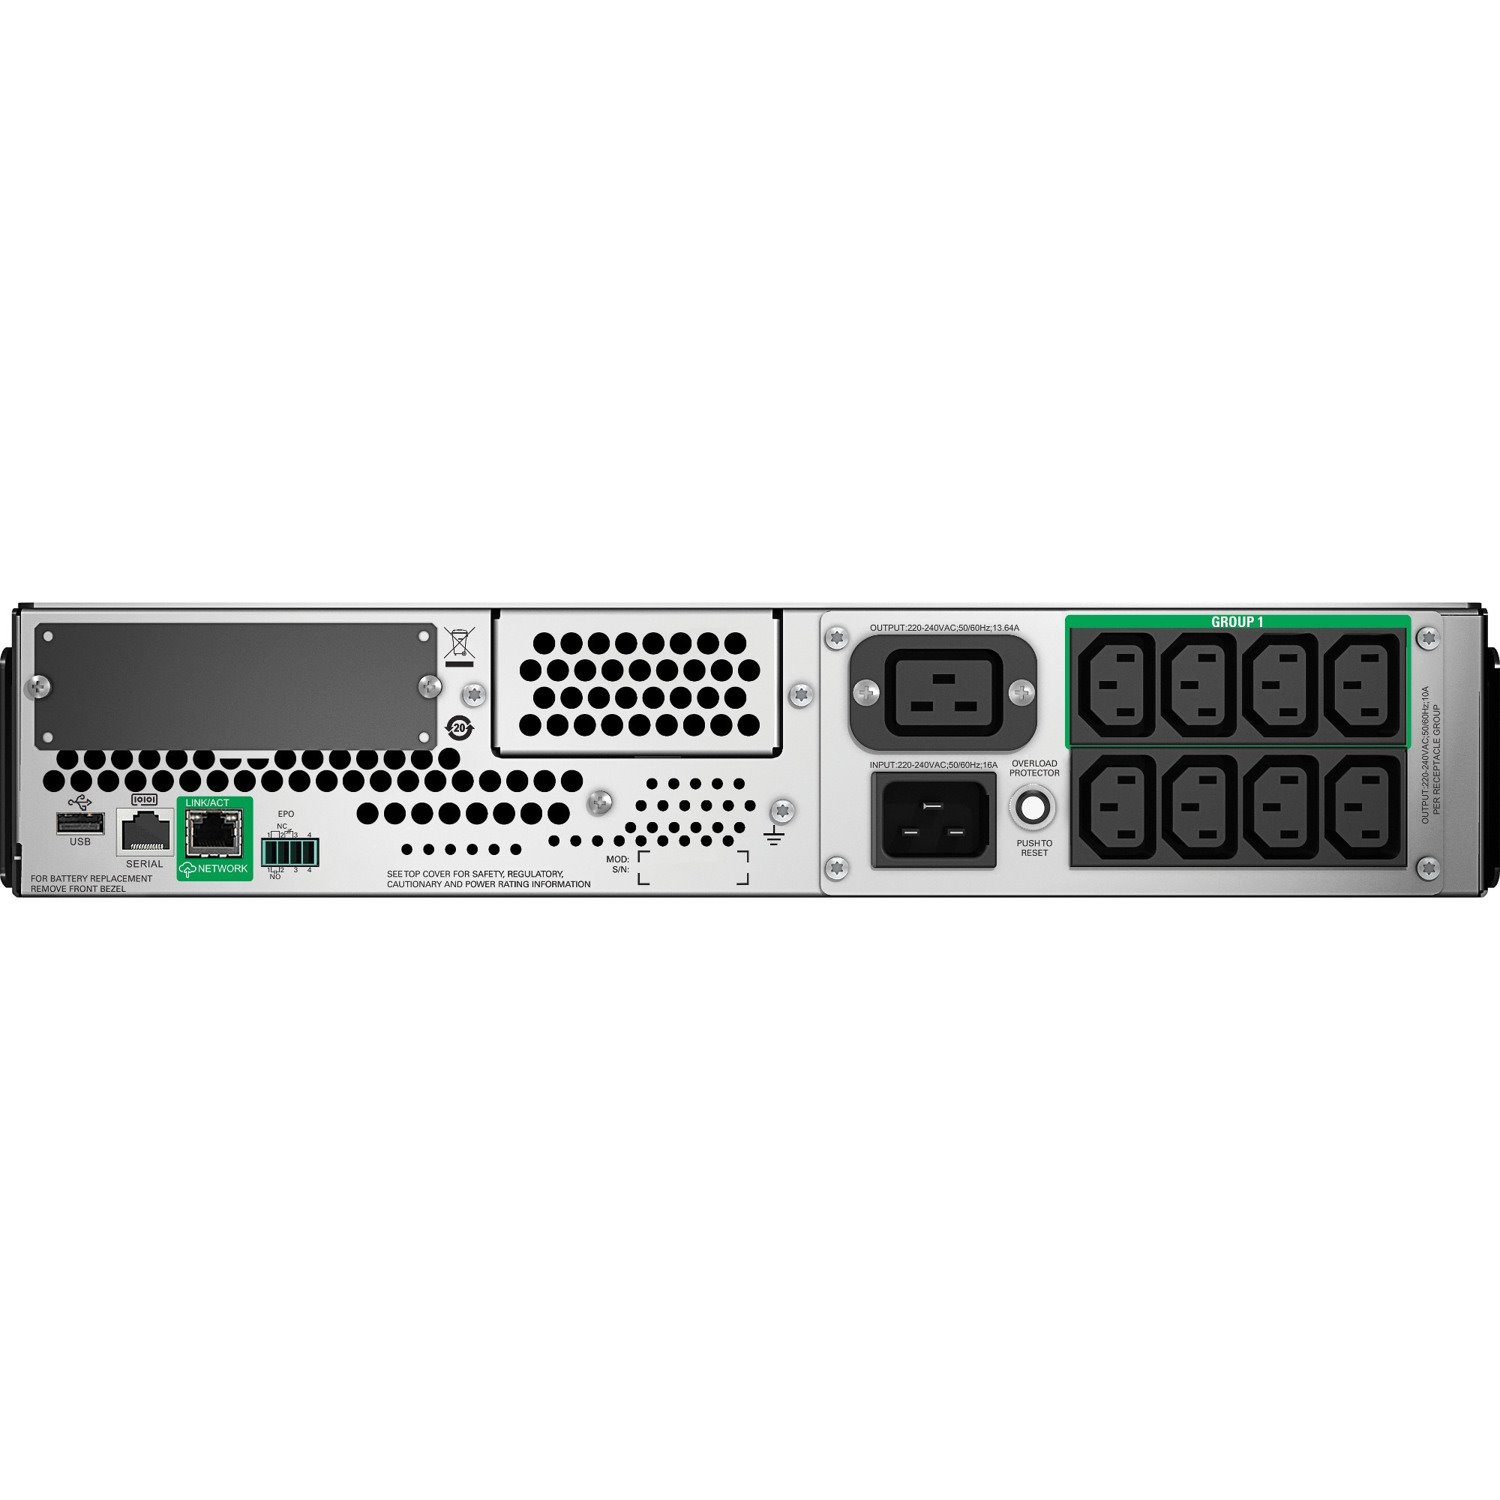 SMT3000RMI2UC - APC by Schneider Electric Smart-UPS Line-interactive UPS 3kVA / 2.7kW. Includes 3 Years Parts Warranty, Smart Connect Cloud Monitoring & Rack Mounting Kit